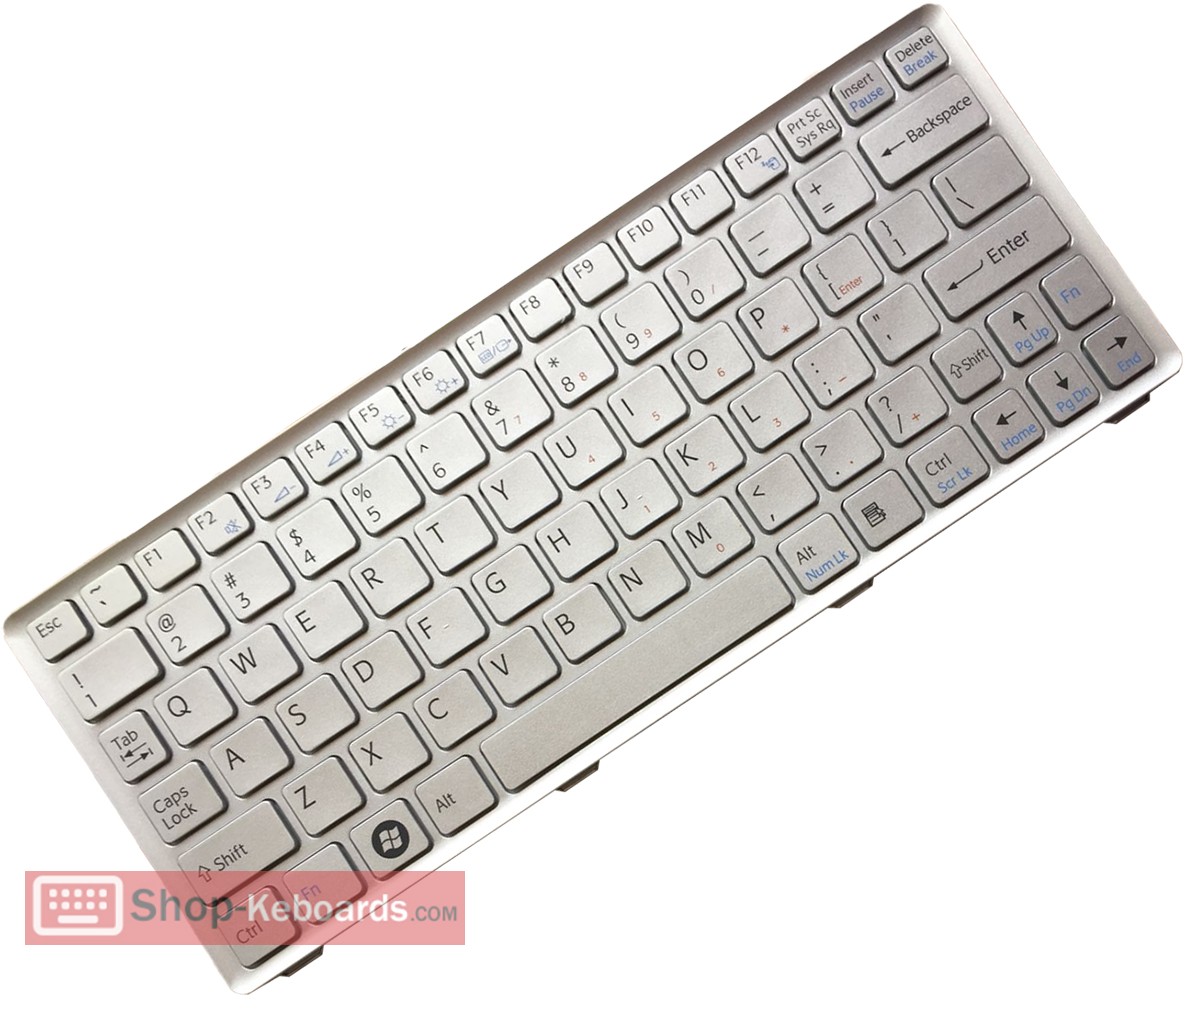 Sony VAIO VPC-W221AX Keyboard replacement